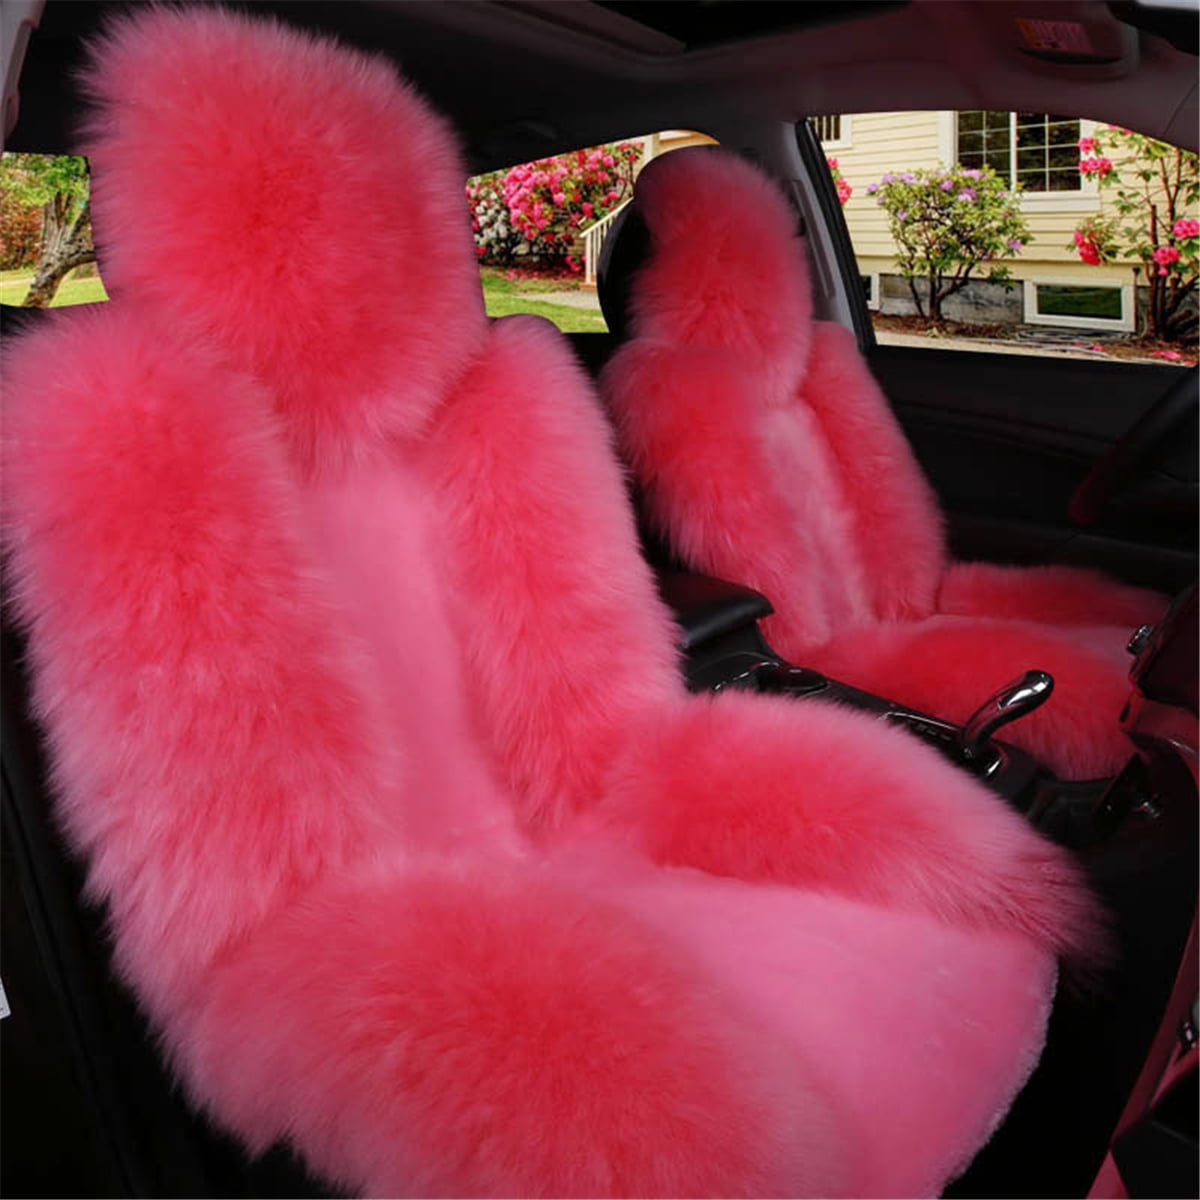 Auto Car Seat Cover Wool Warm Sheepskin Fur Front Seat Cushion Covers Pink For 5 Seats Car Universal